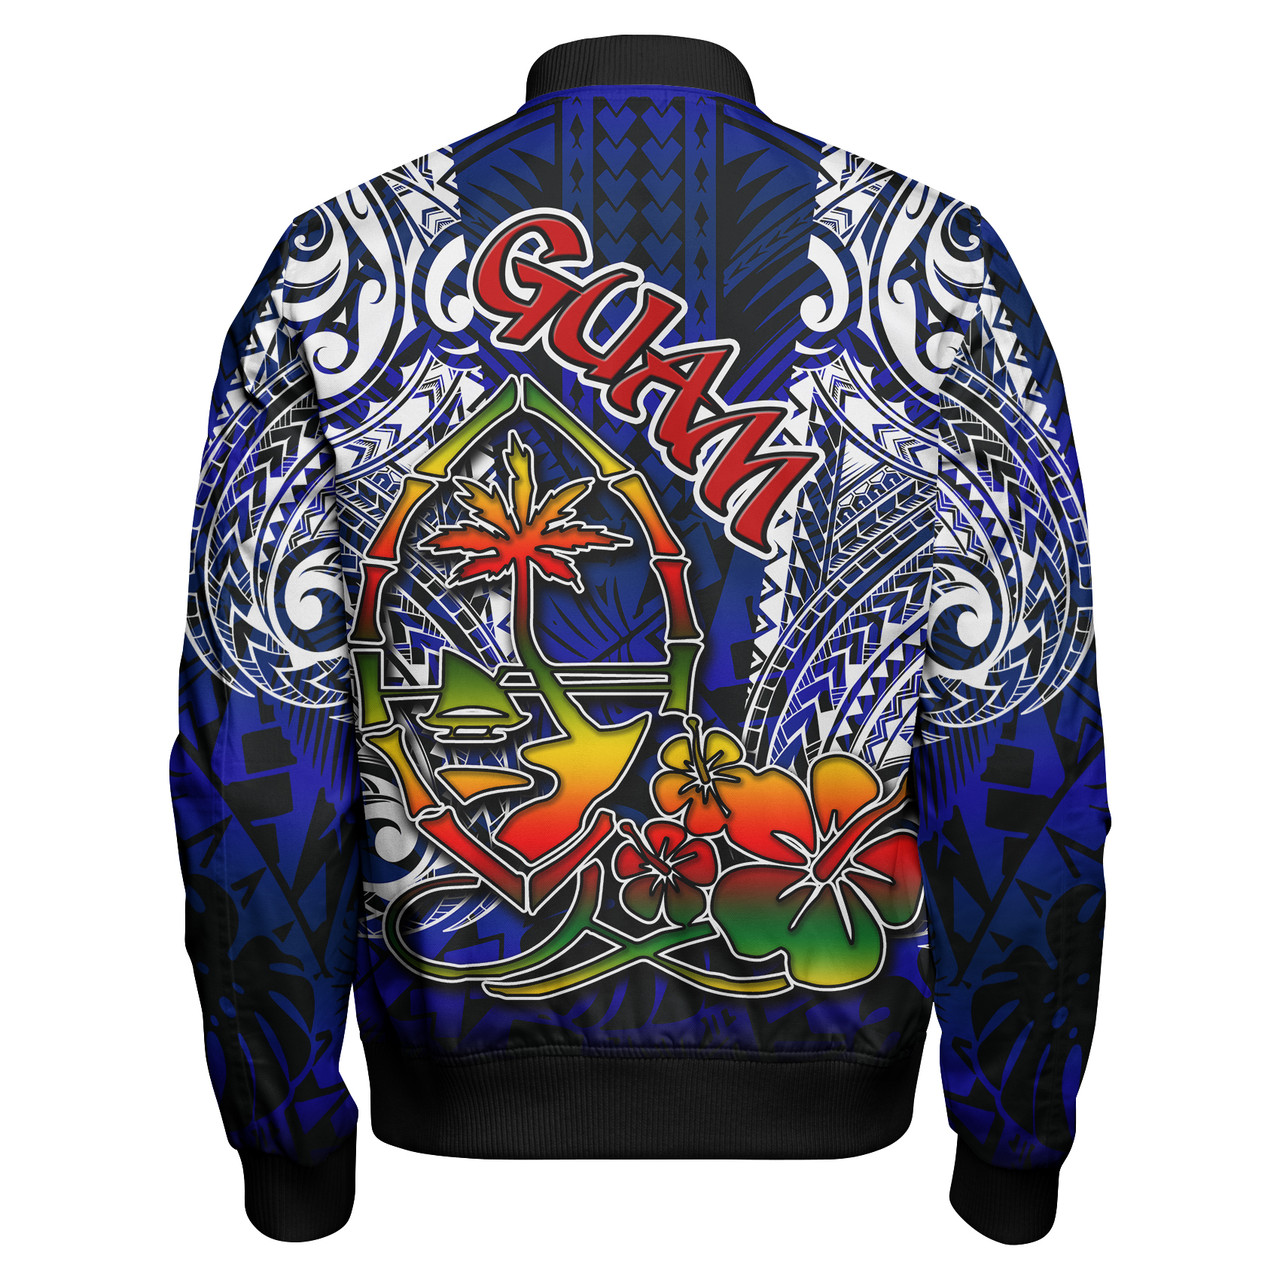 Guam Bomber Jacket - Guam Independence Day '' Wish You A Very Happy Independence Day '' With Polynesian Patterns